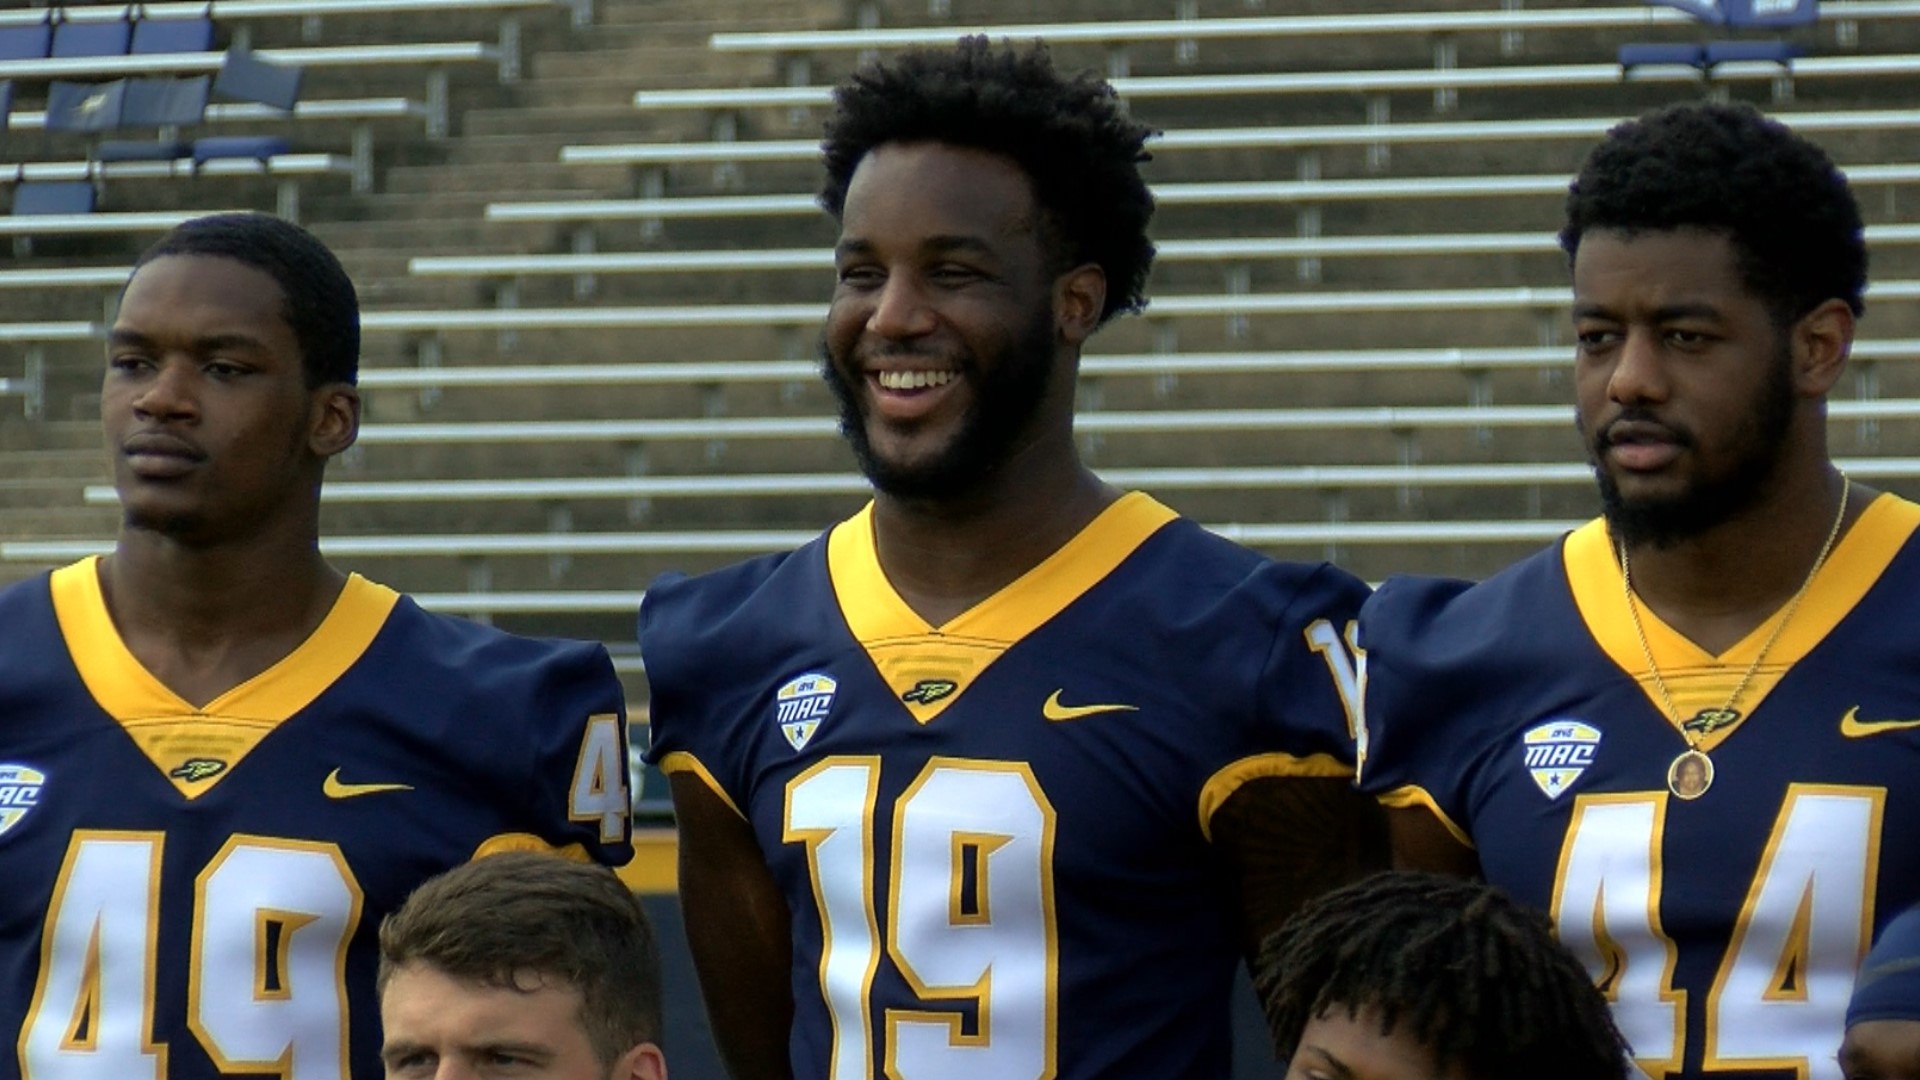 St. John's grad Dallas Gant transferred to Toledo football after playing in 36 games for Ohio State.